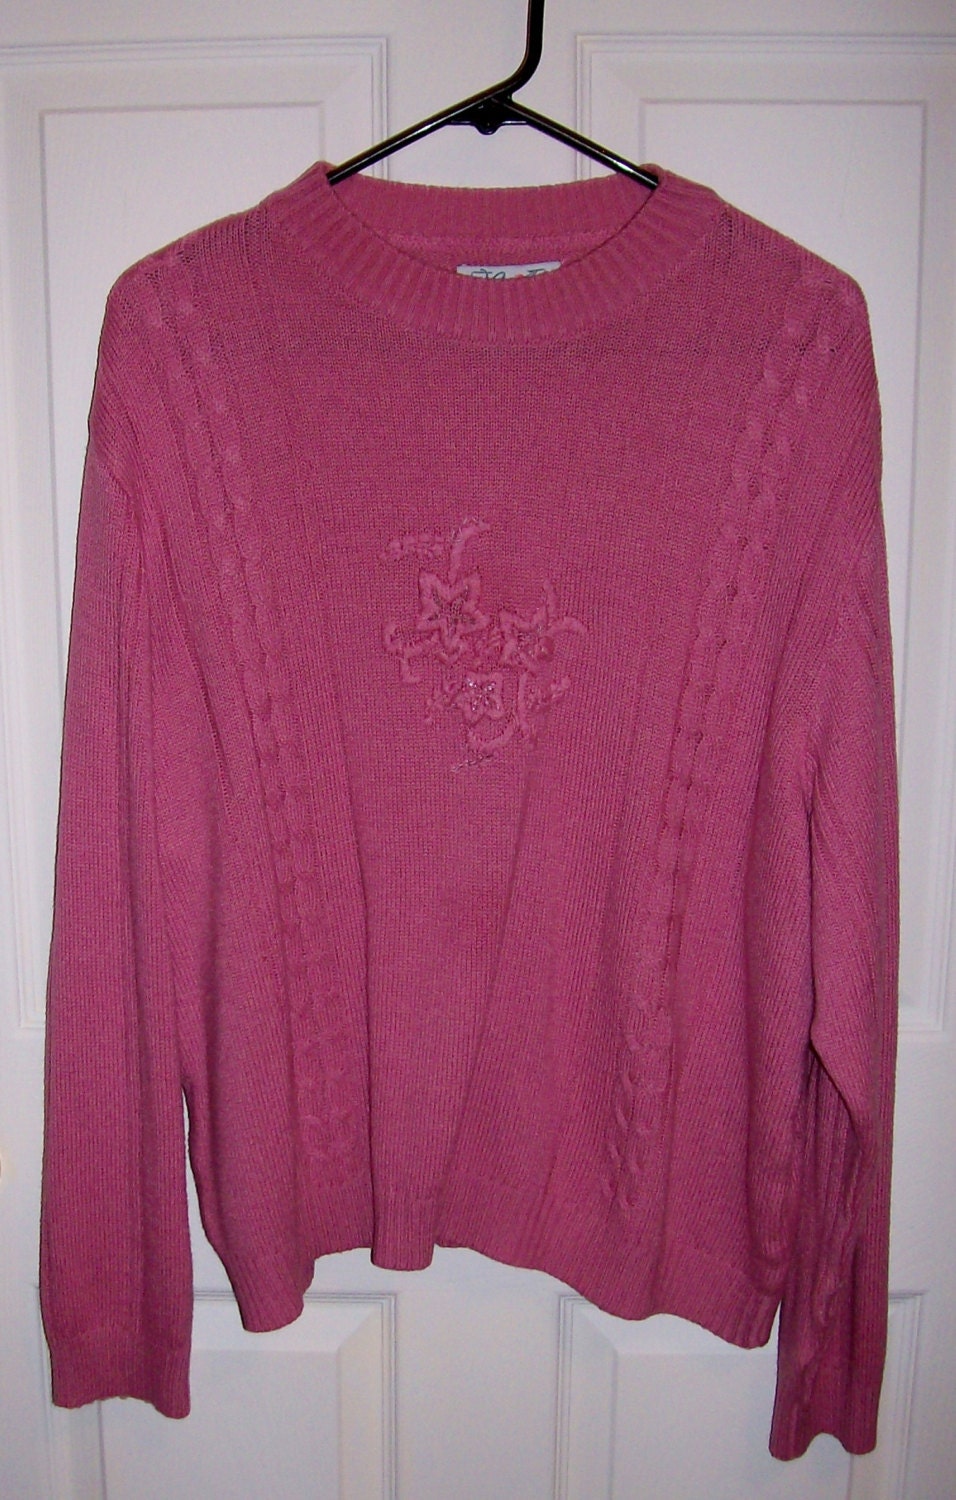 99 CENT SAlE Vintage Ladies Rose Pink Sweater by Haband XX